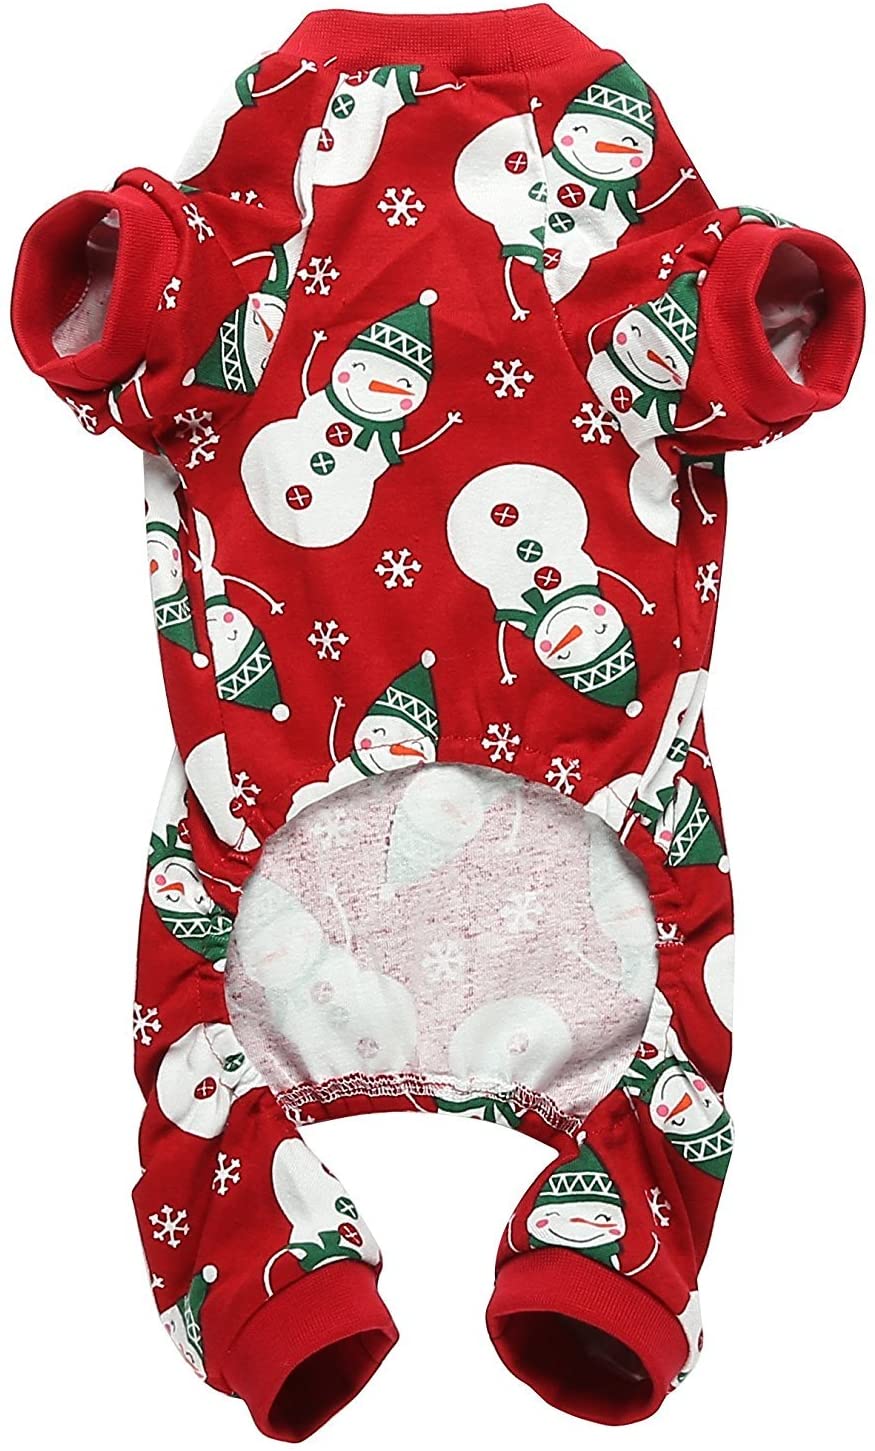 Lanyarco-Lovely-Small-Pet-Dogs-Pajamas Cutest 10 Pajamas for Dogs on Amazon in 2021/2022